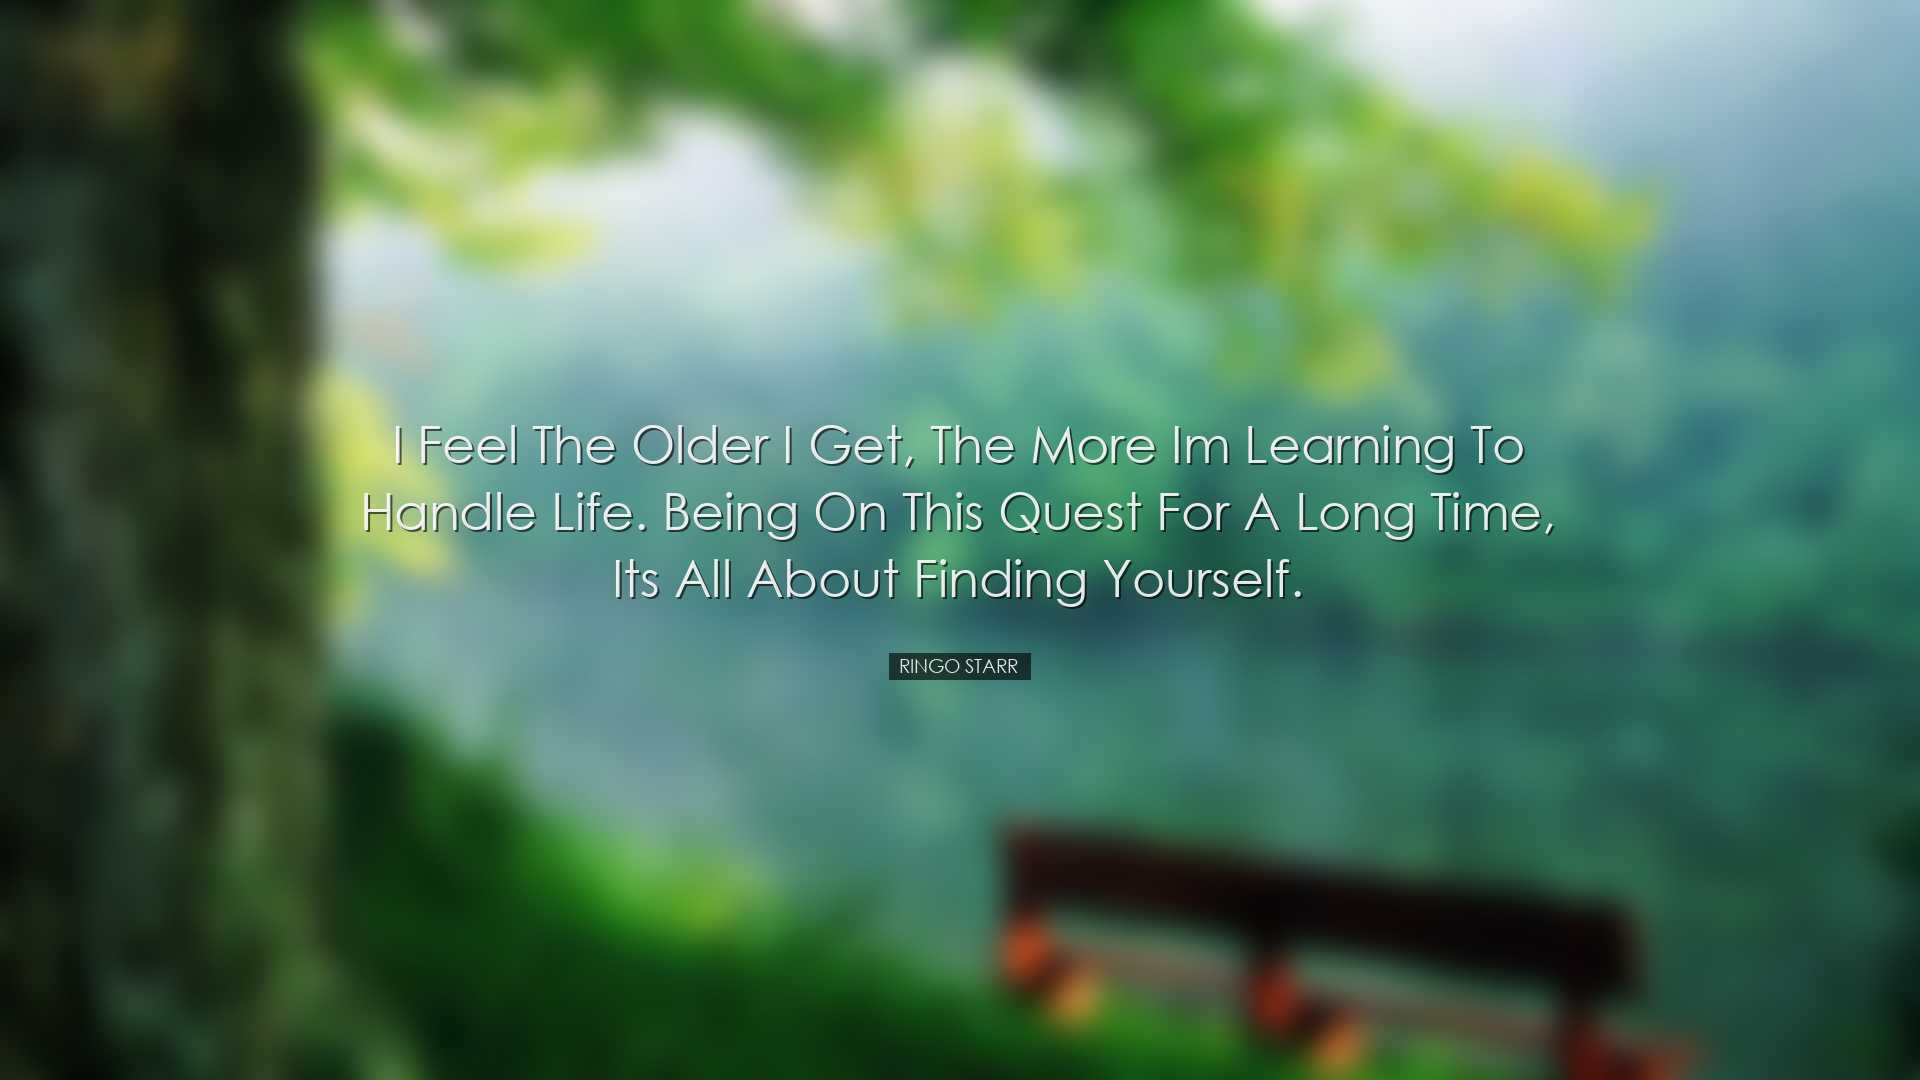 I feel the older I get, the more Im learning to handle life. Being